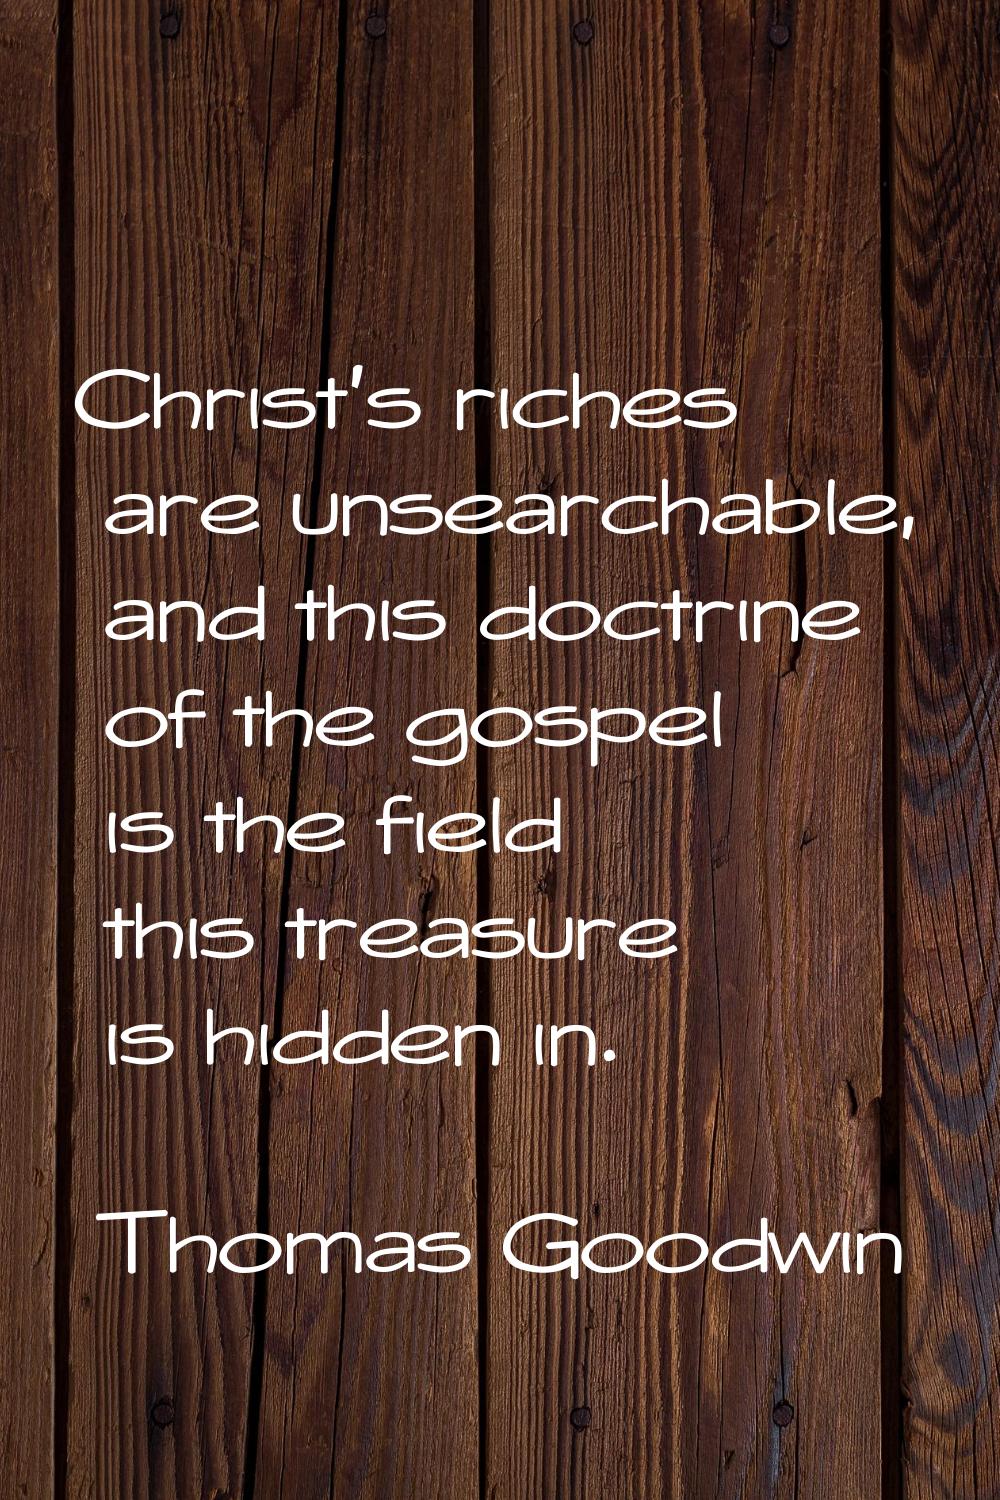 Christ's riches are unsearchable, and this doctrine of the gospel is the field this treasure is hid